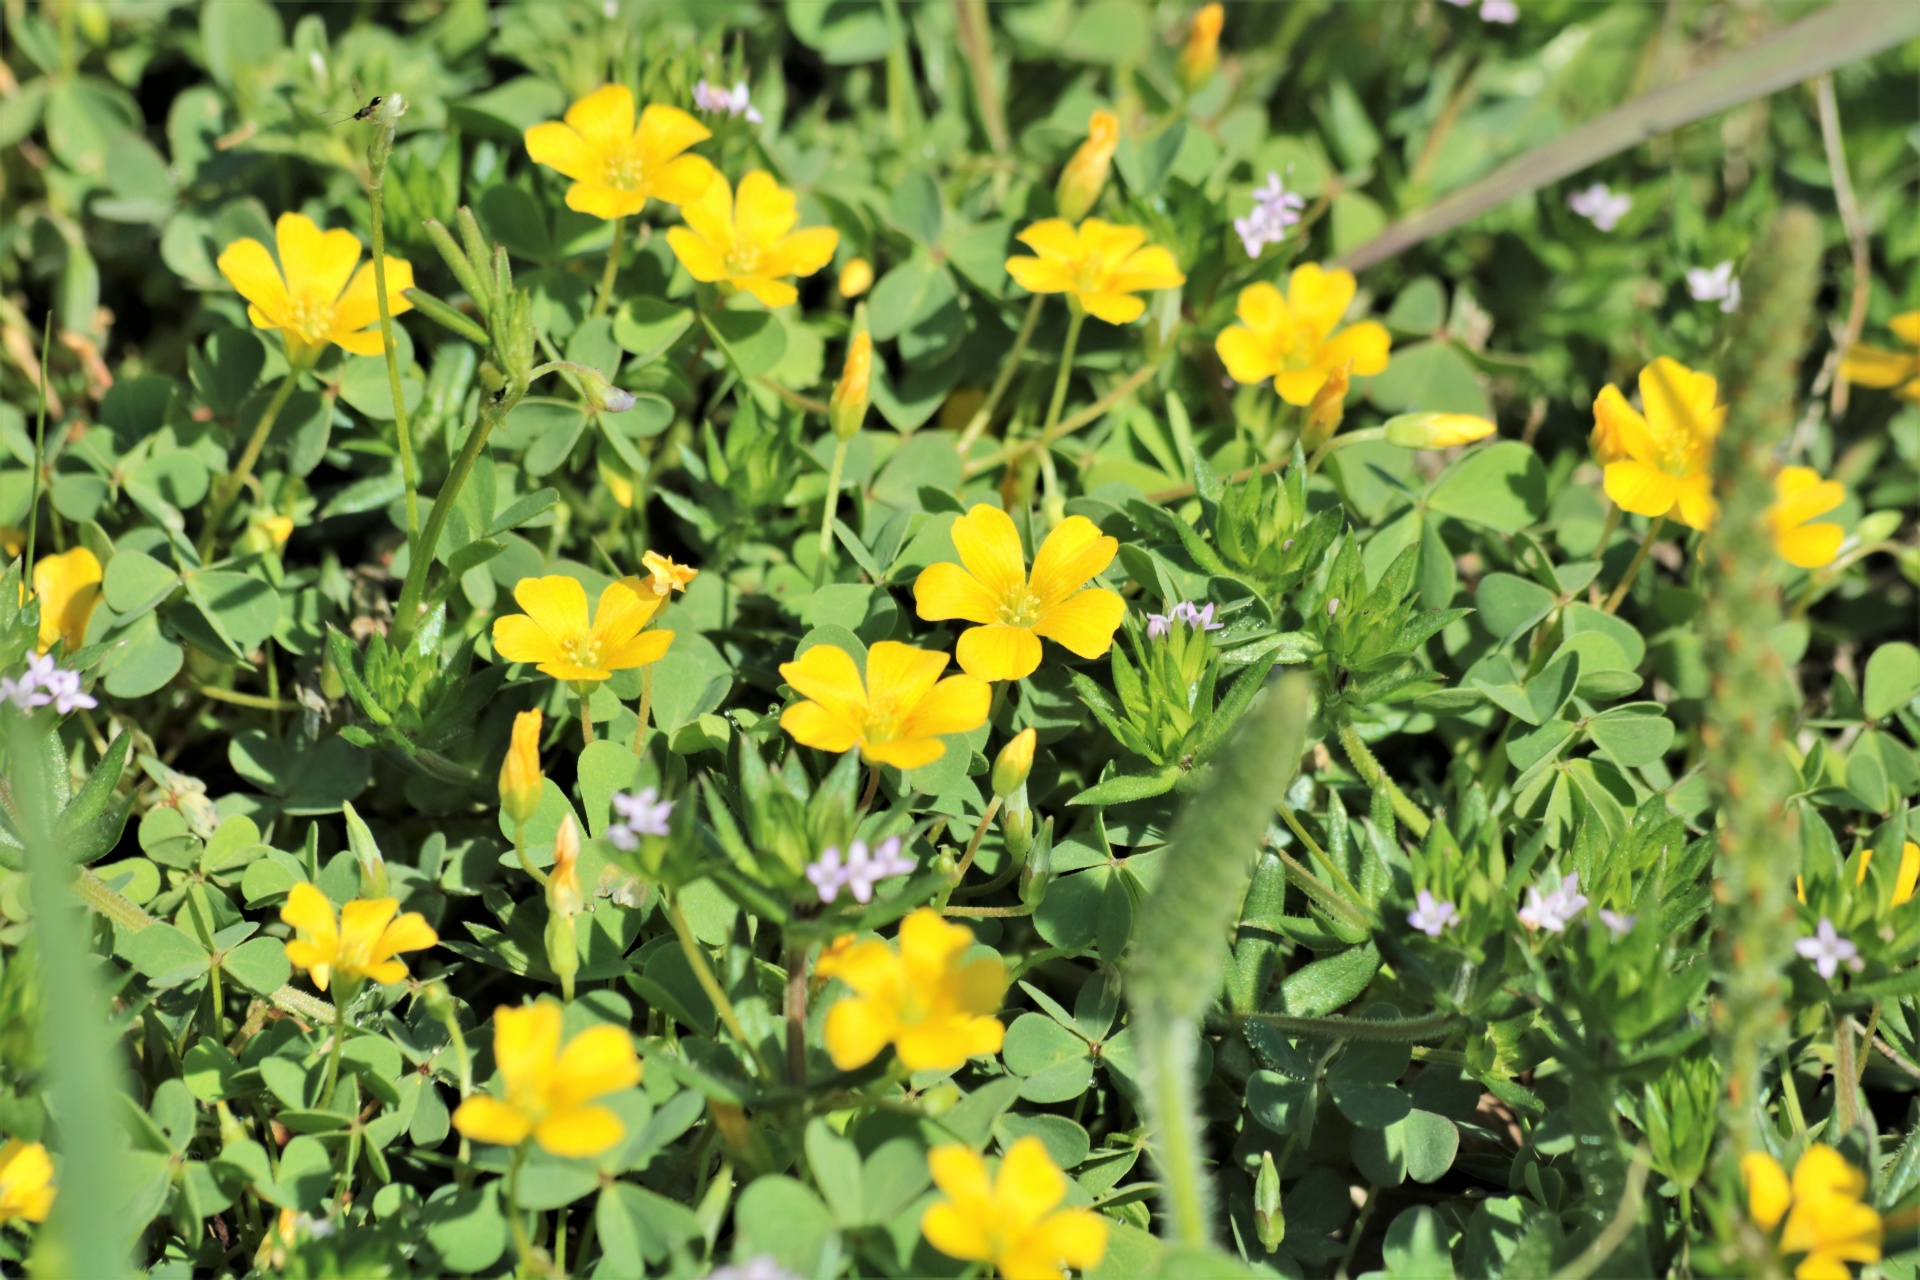 Close-up of bright yellow slender wood sorrel wildflowers, growing in an Oklahoma country field.